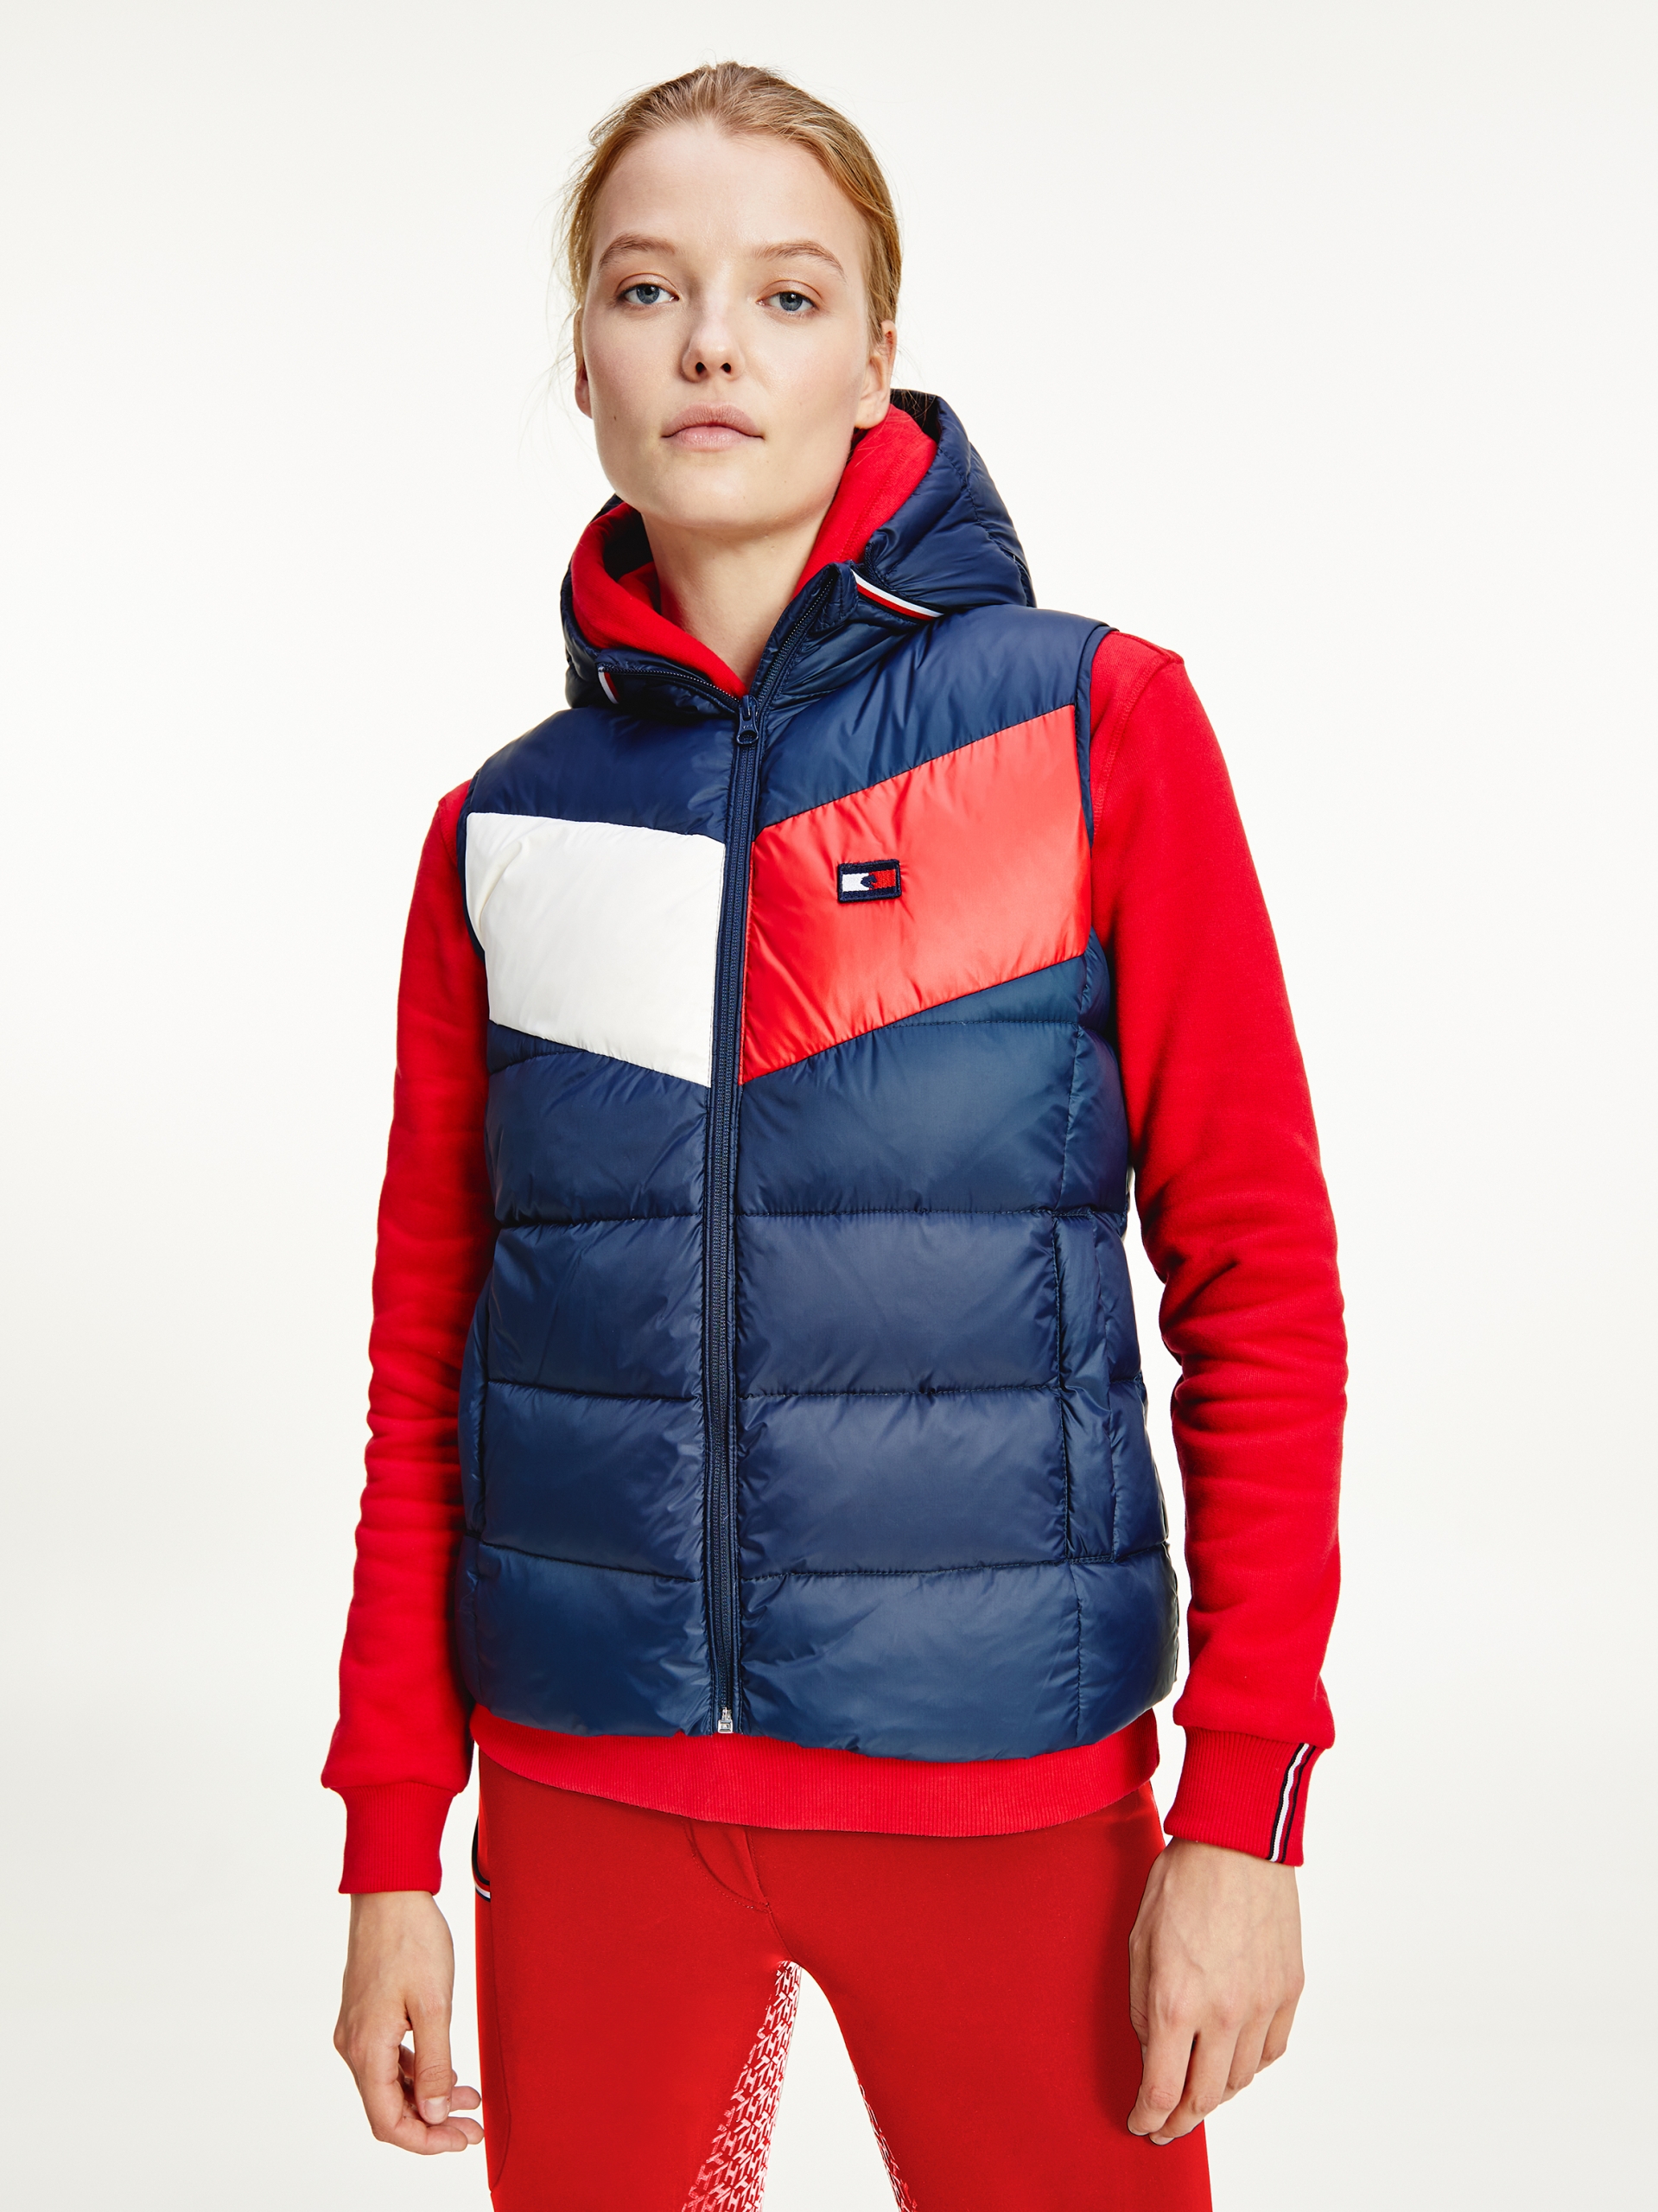 register Spit out hierarchy Tommy Hilfiger Recycled Down Women's Gilet- Desert Sky | WB Equiline  Equestrian Clothing